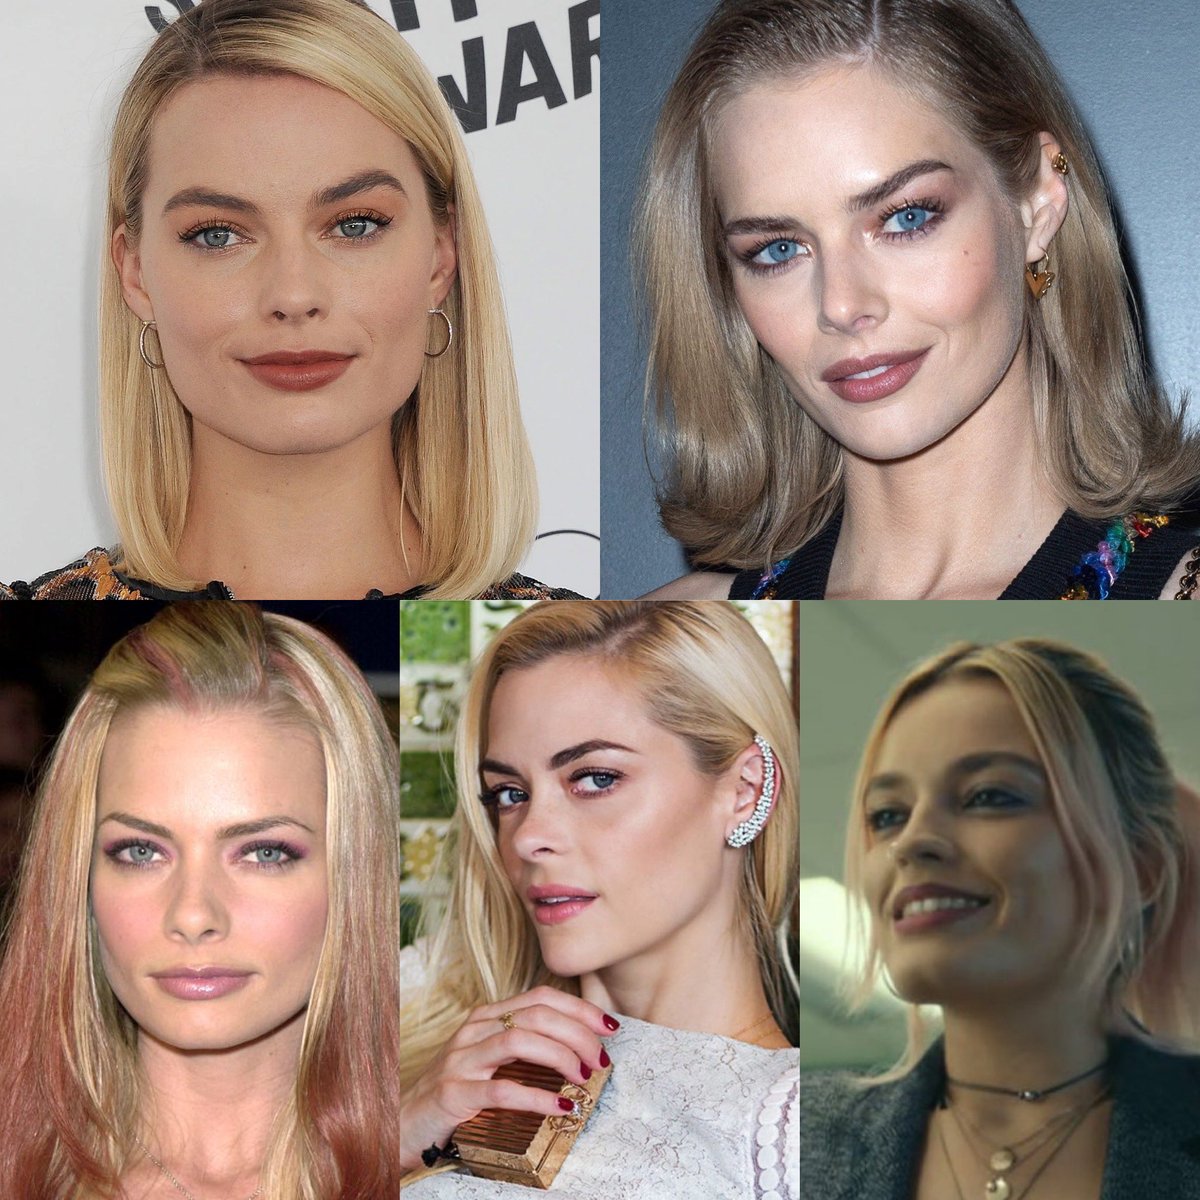 Ian Titular on Twitter: 'RT @Le_Severine_Cox: Margot Robbie: Solid ...